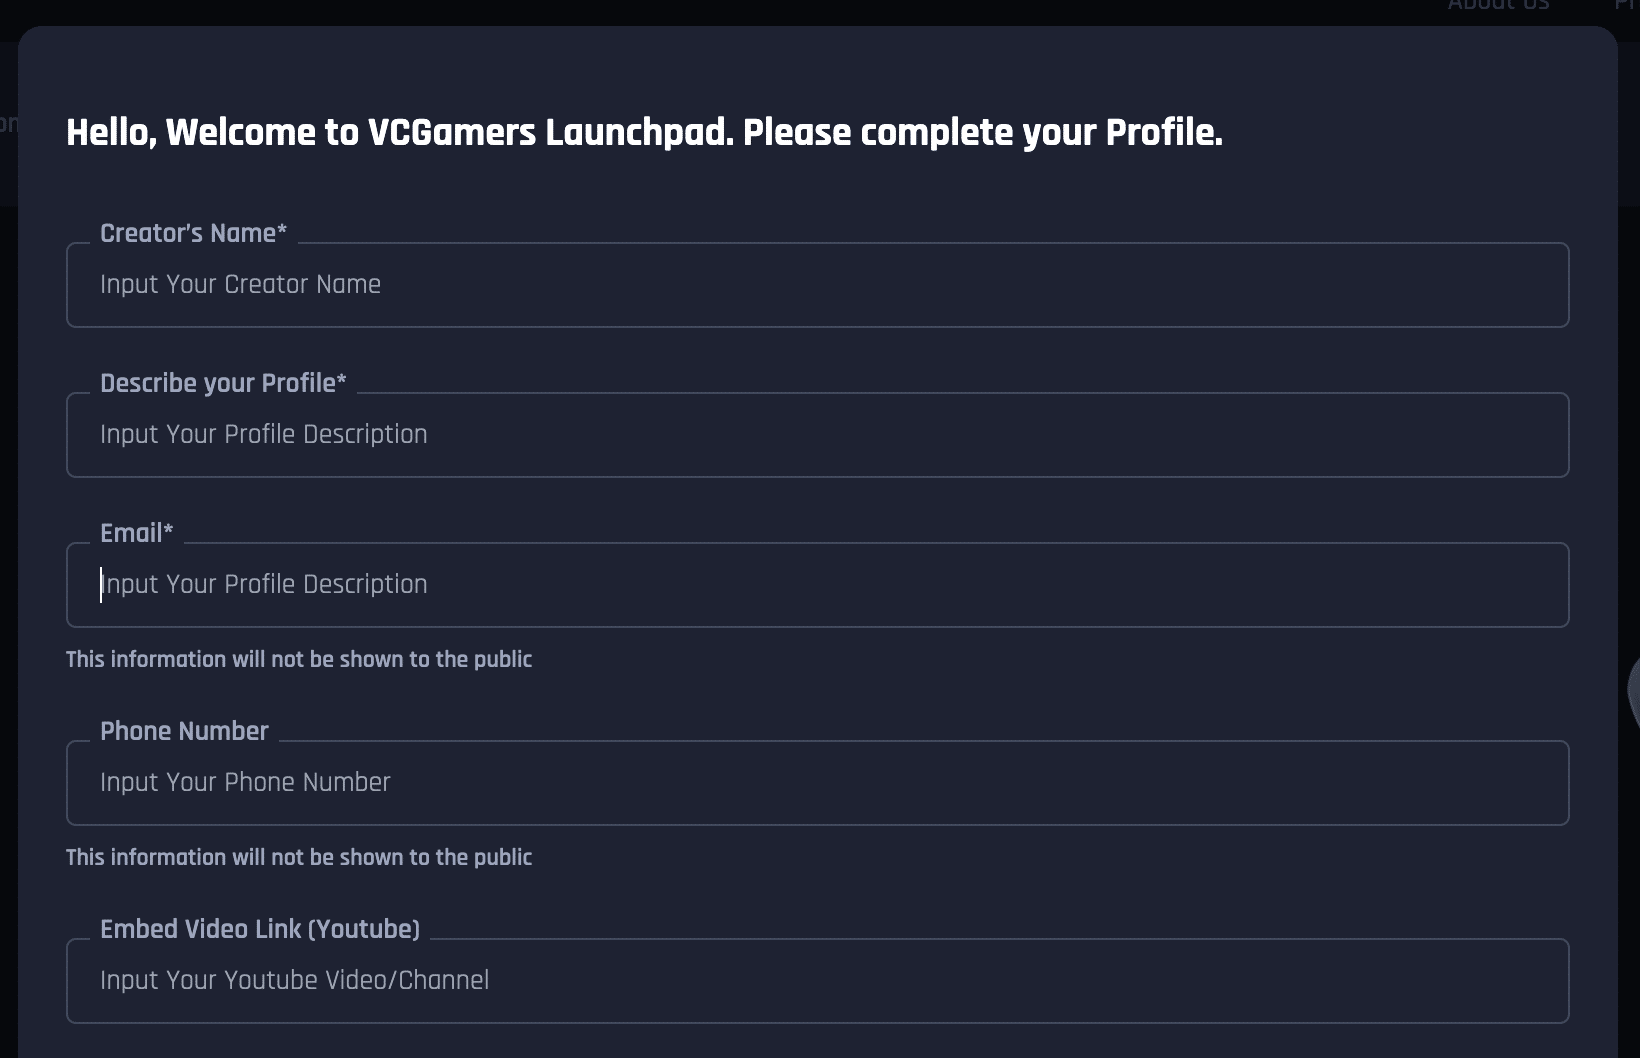 How to Register VCGamers Launchpad Game